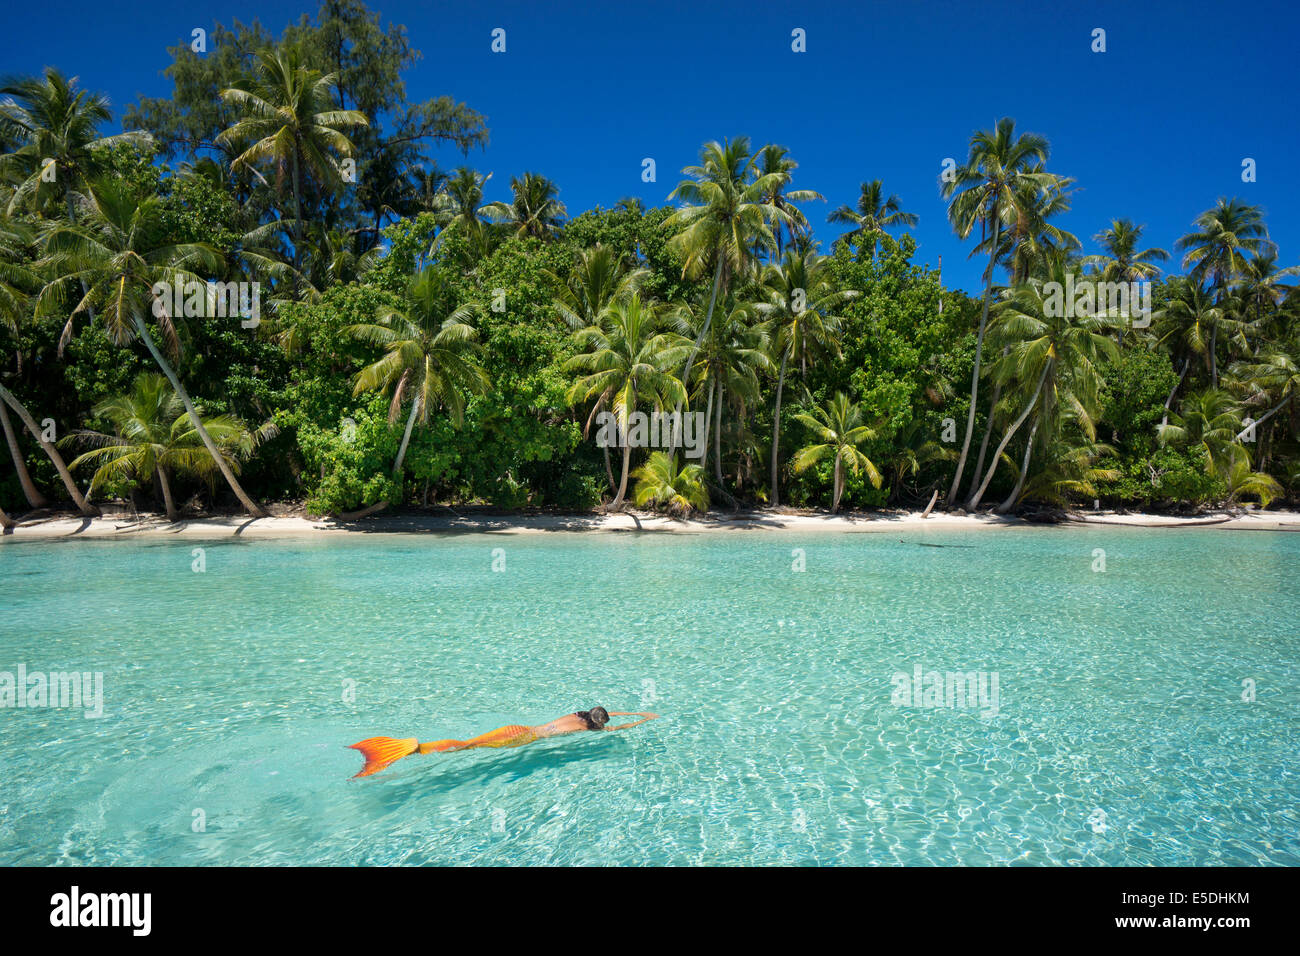 Palau, young woman in mermaid costume swimming in a lagoon Stock Photo